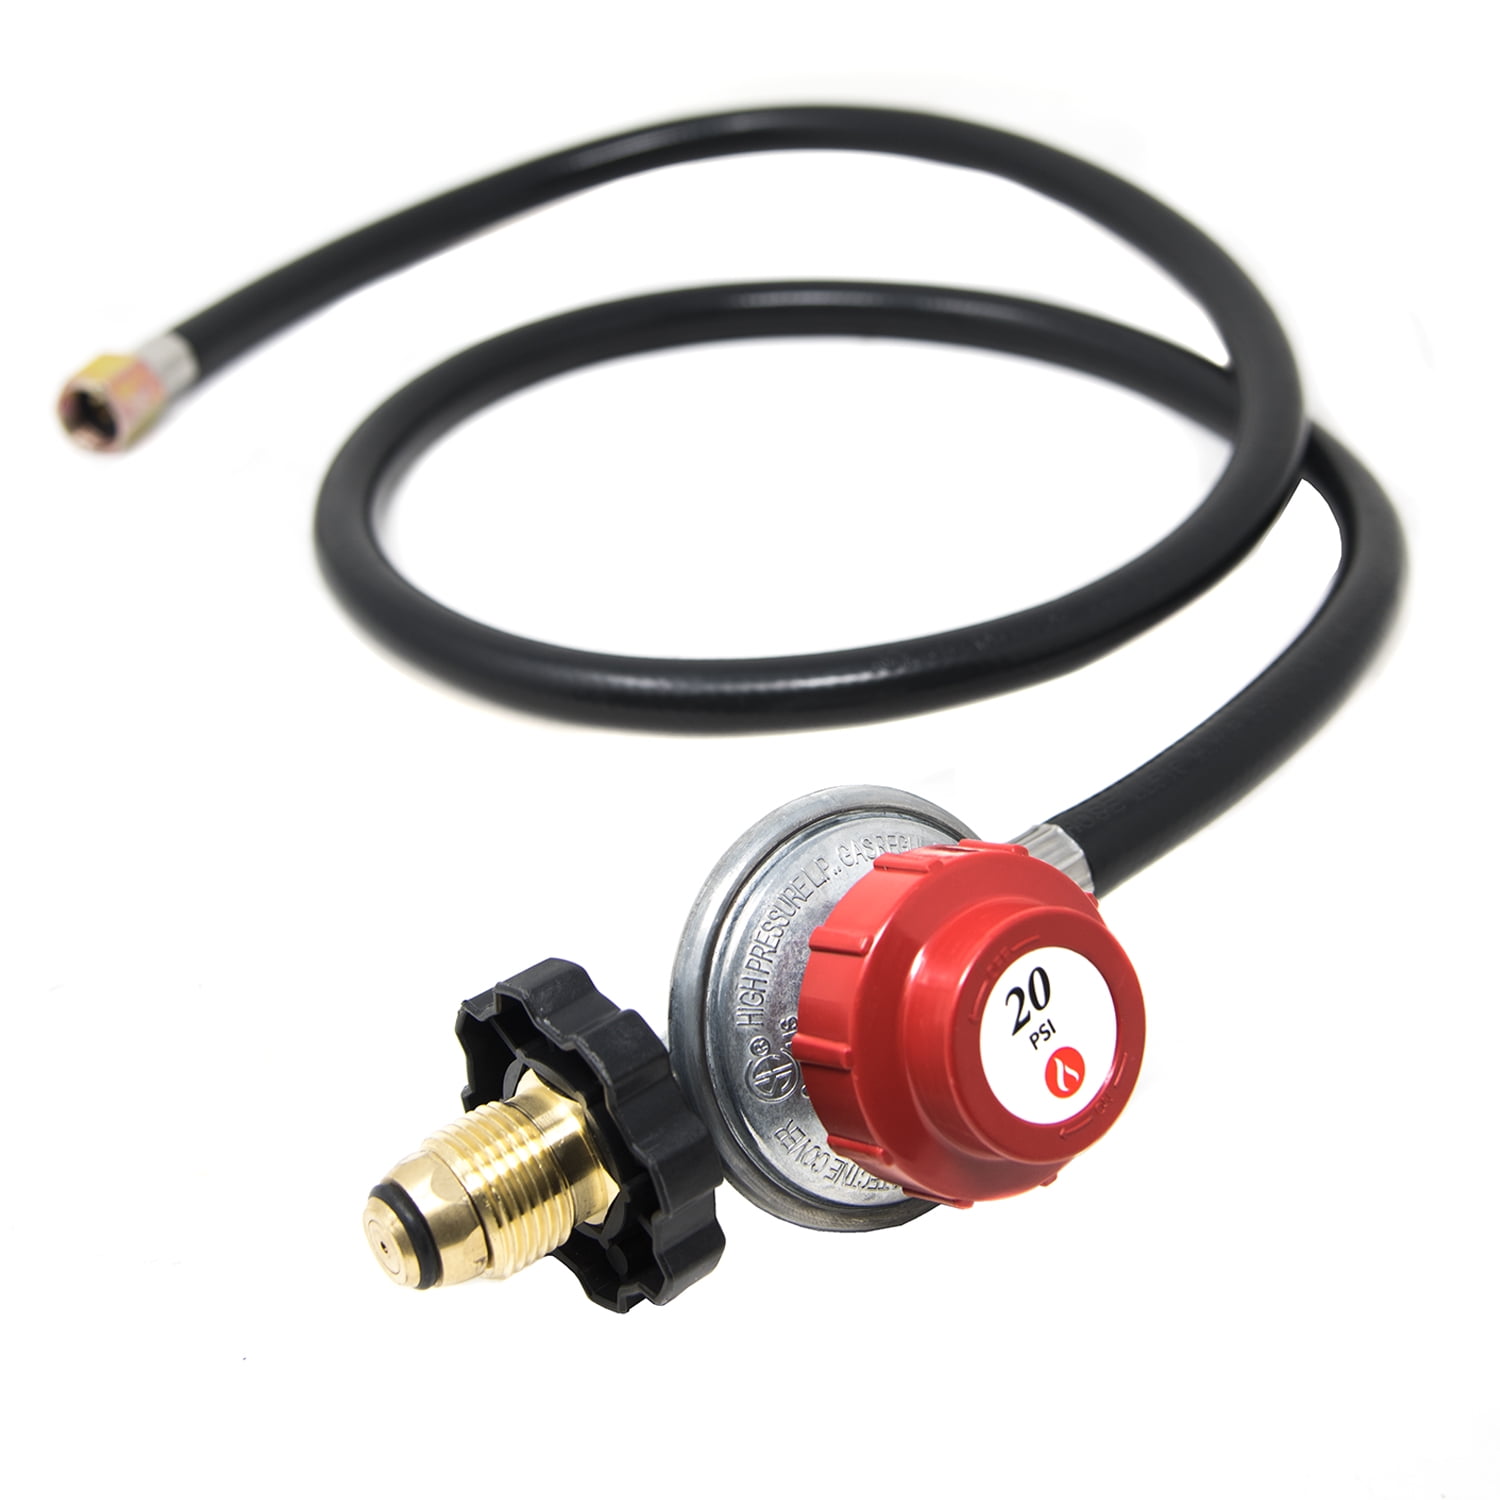 Details about   5 FT Hose Low Pressure Propane Gas Tank Regulator BBQ Qcc1/Type LP Stove 